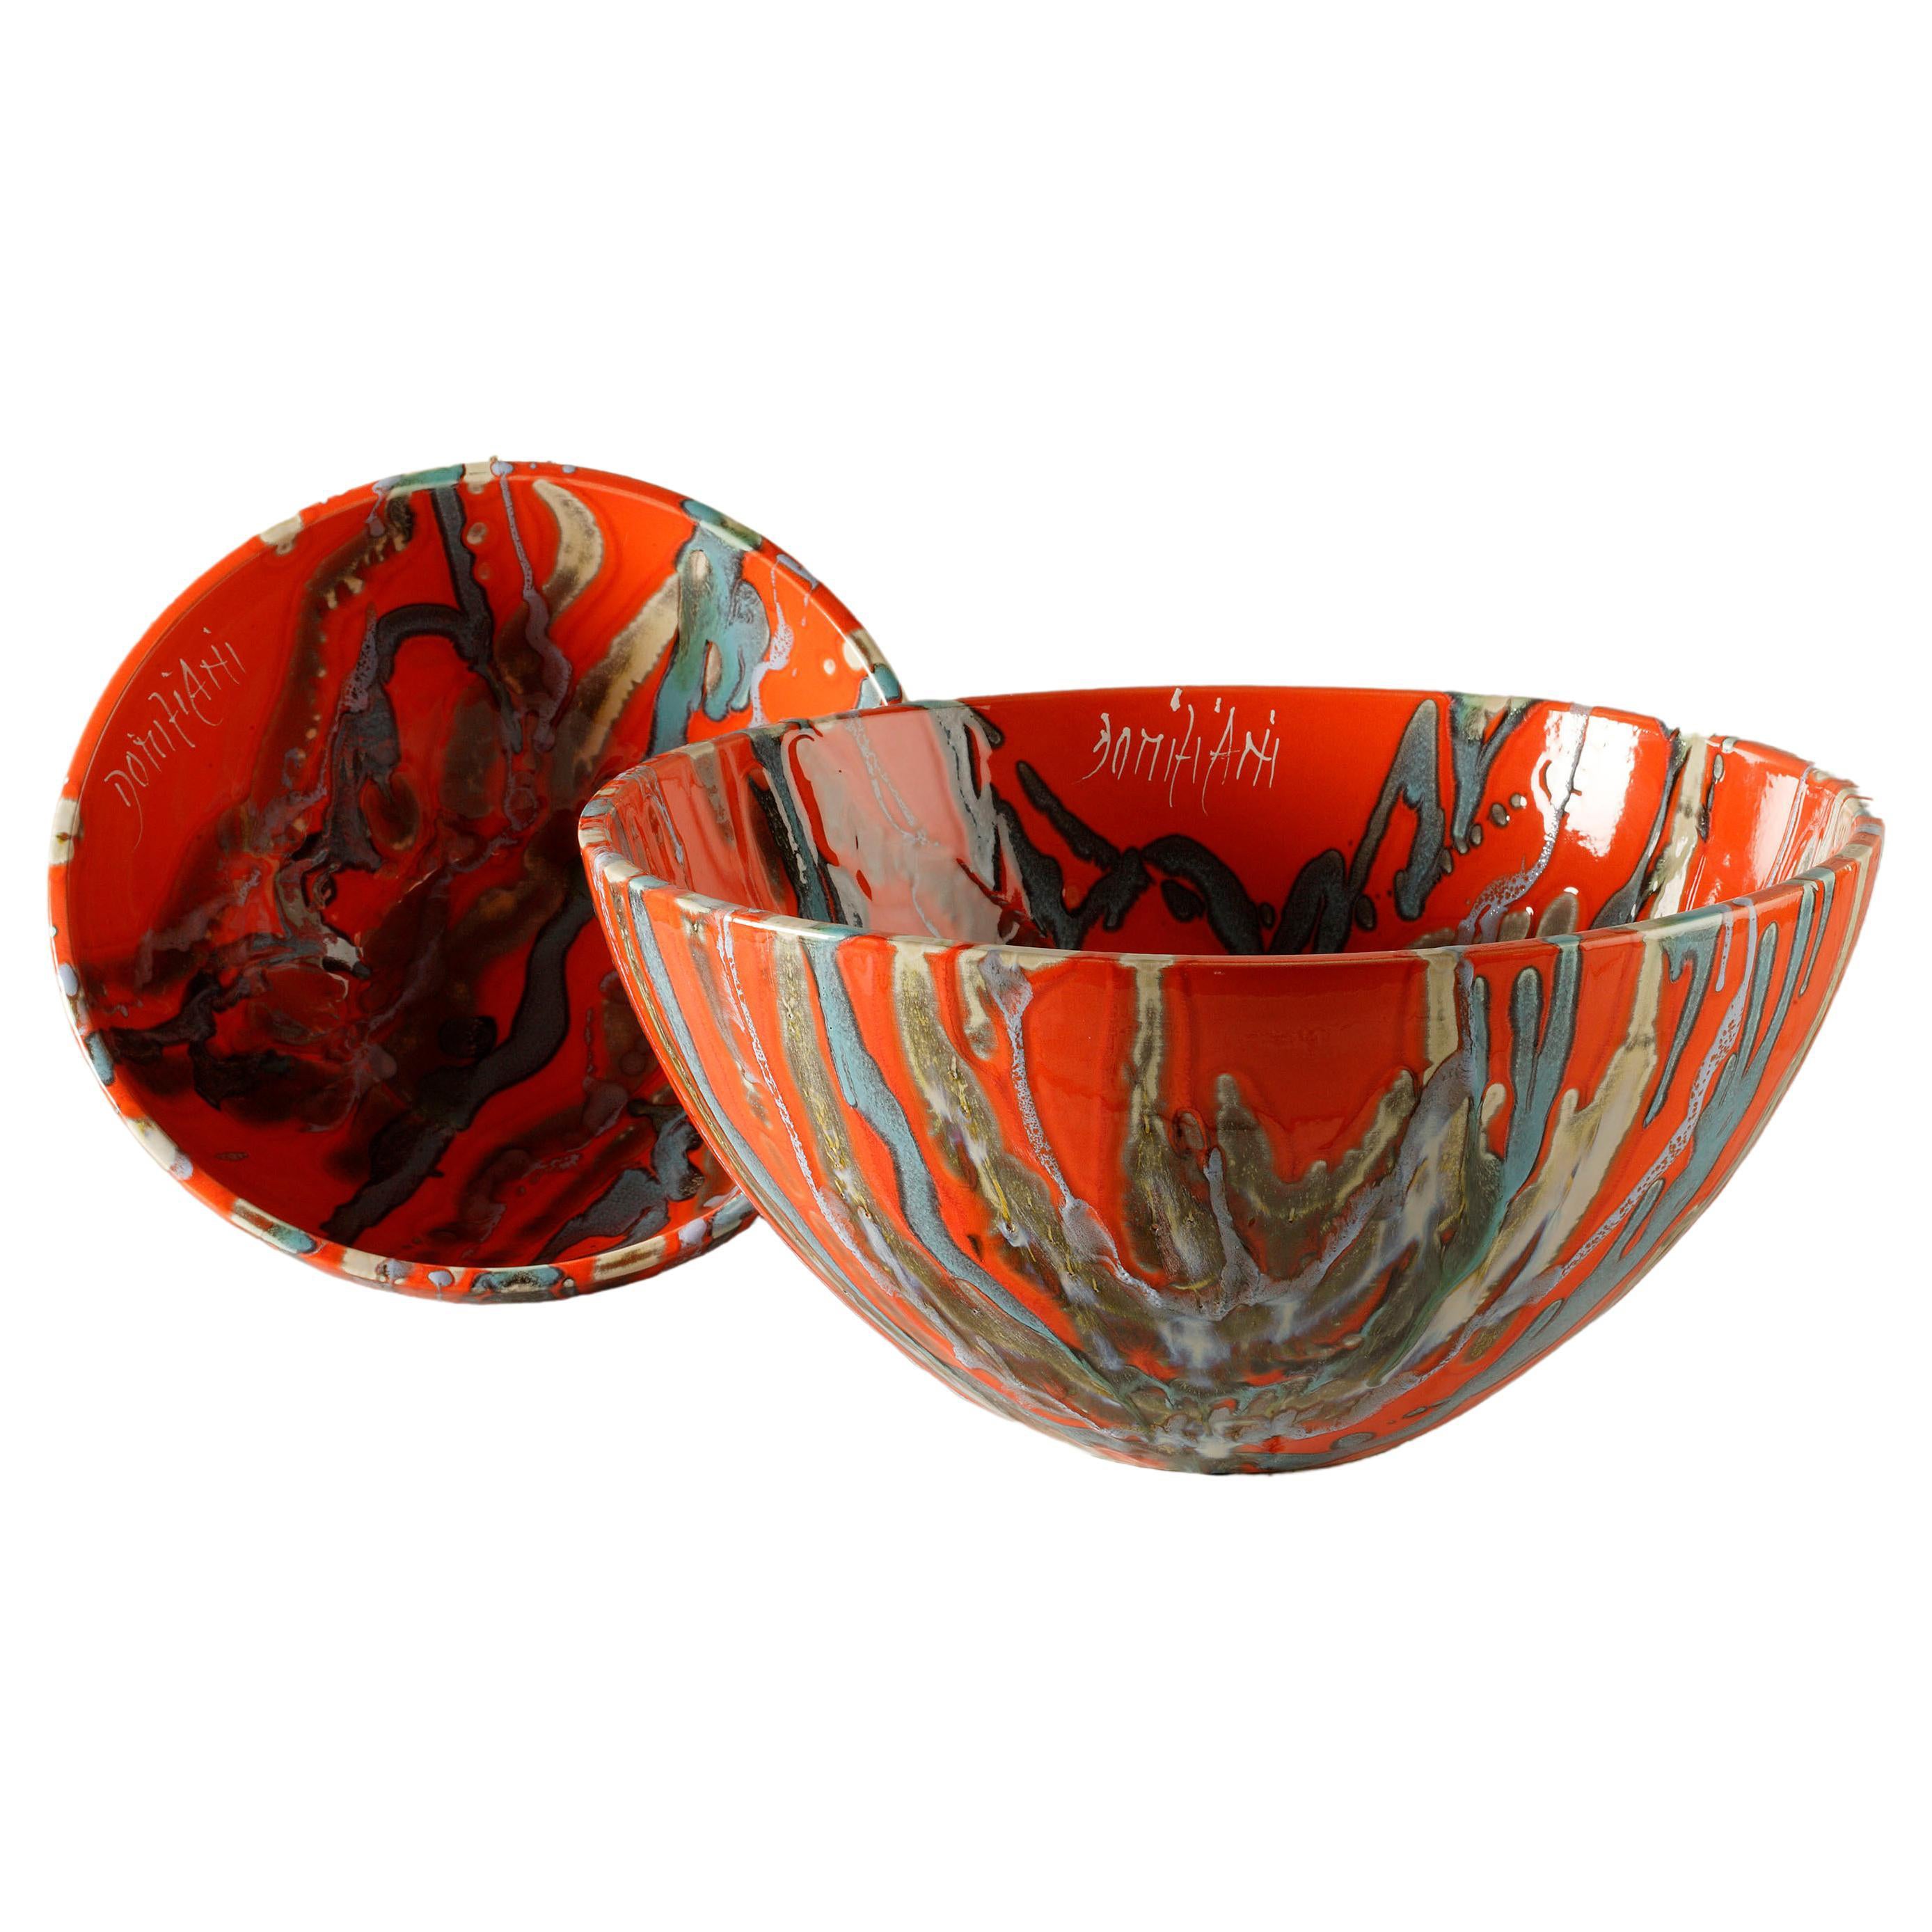 Ceramic Salad Bowl Ø 30cm x H 14cm, Handmade in Italy 2021, Choose Your Pattern For Sale